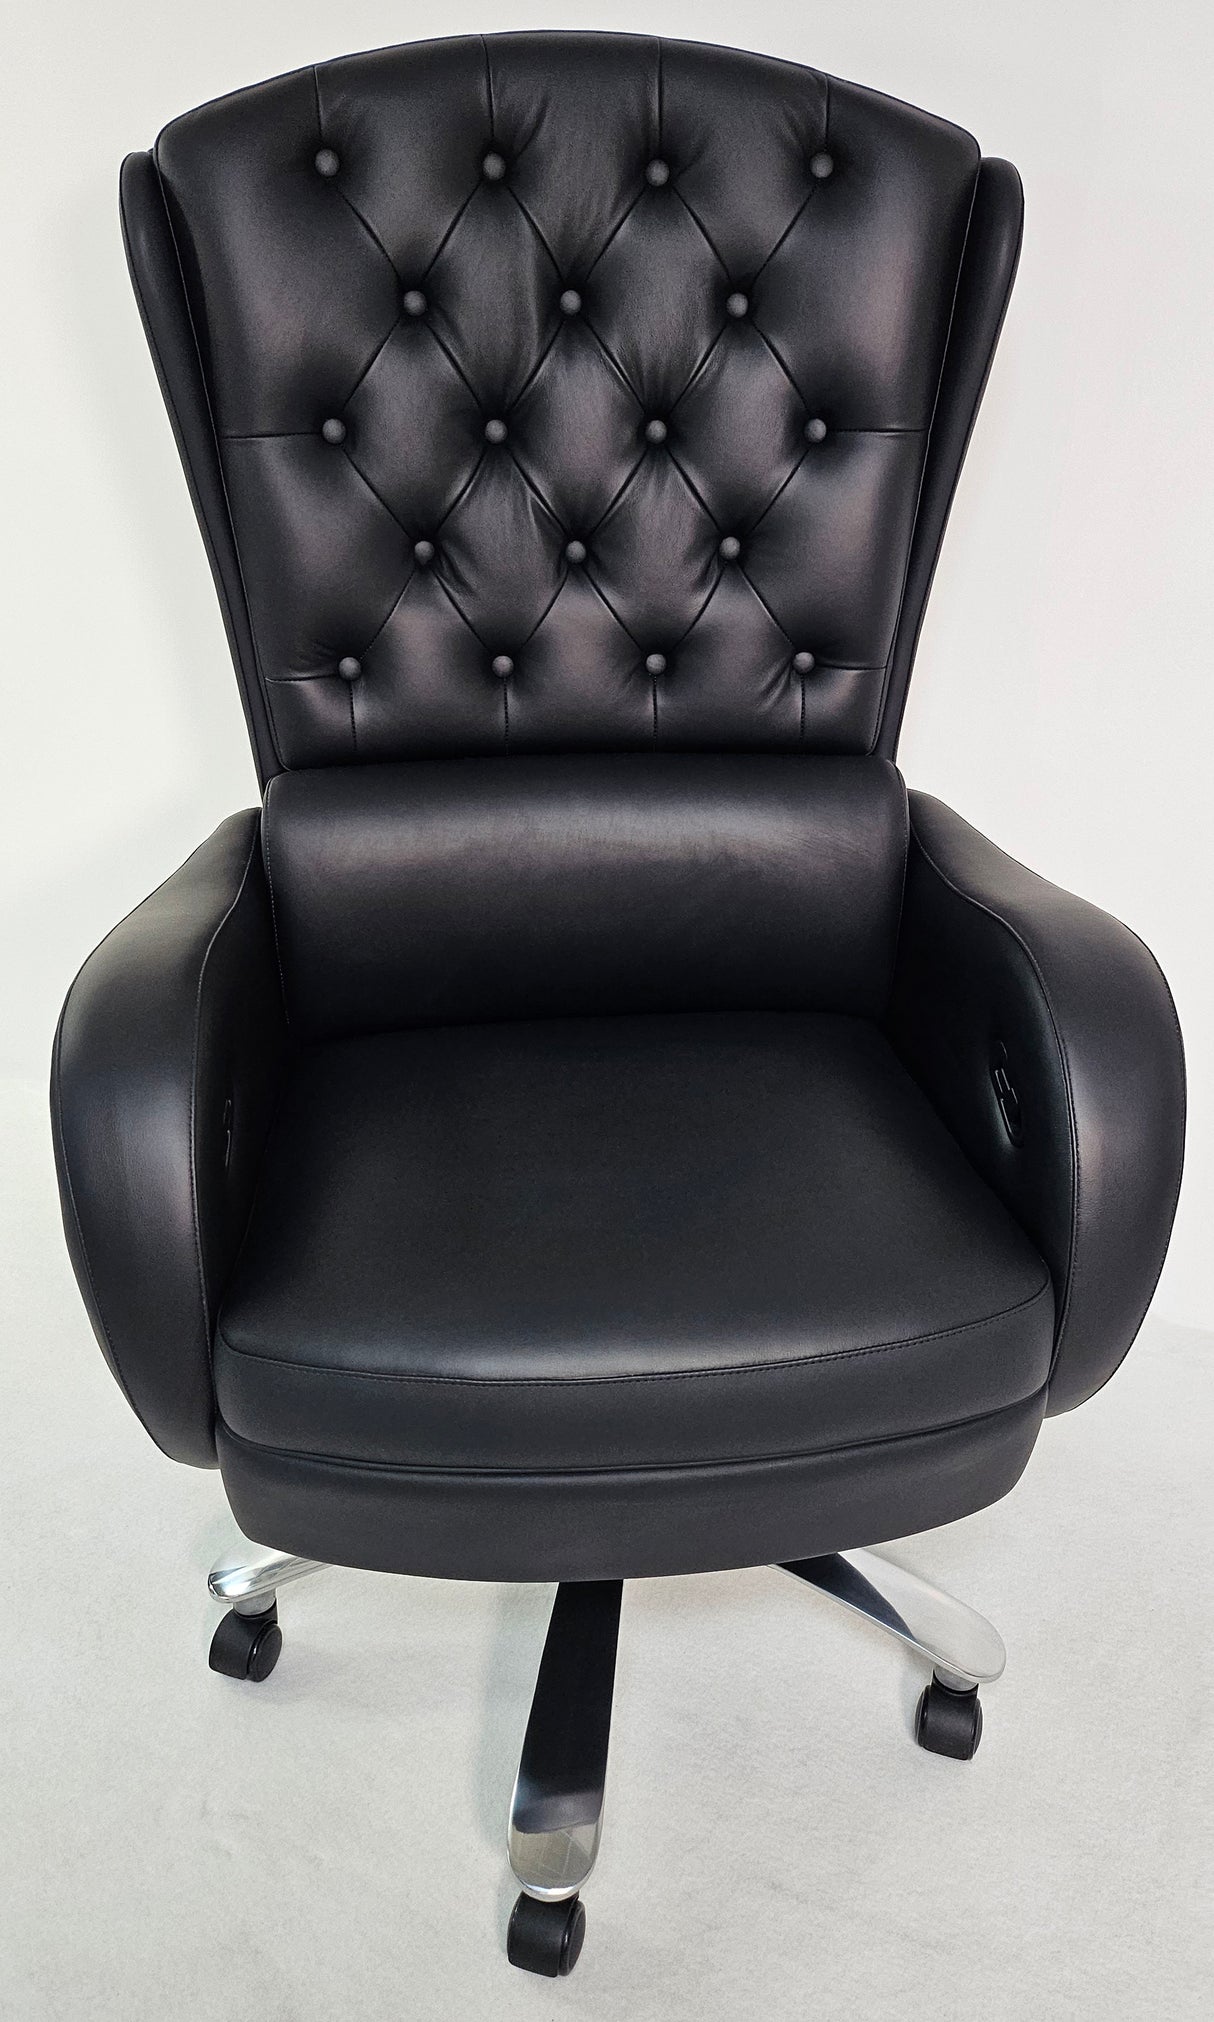 Genuine Black Leather High Back Executive Office Chair with Chesterfield Design - 6002HL